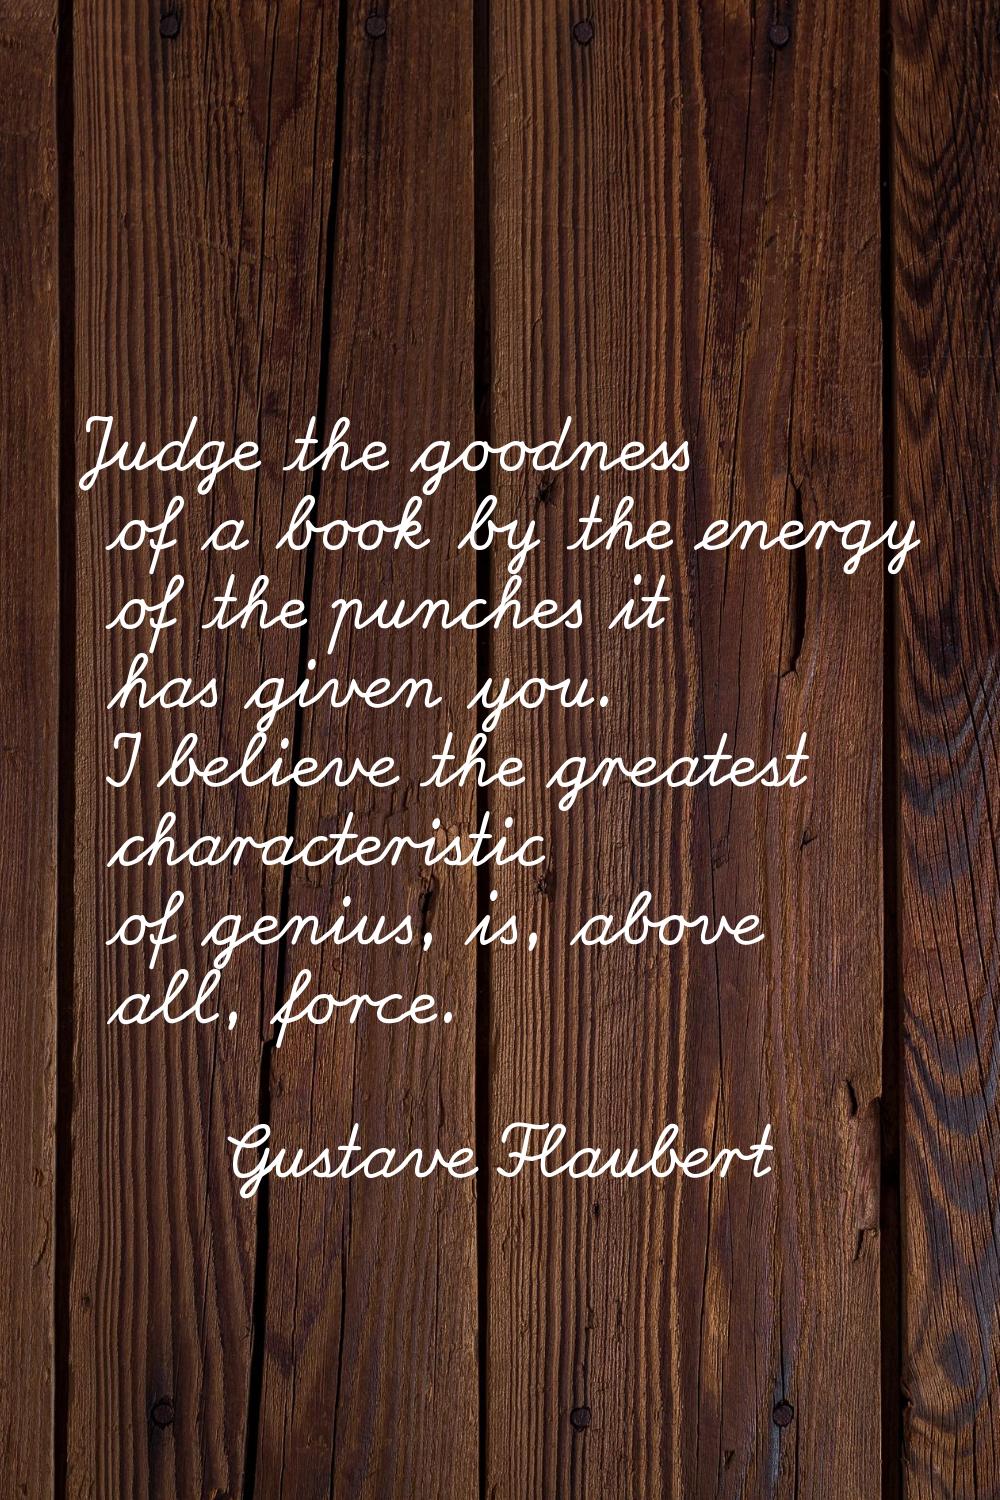 Judge the goodness of a book by the energy of the punches it has given you. I believe the greatest 